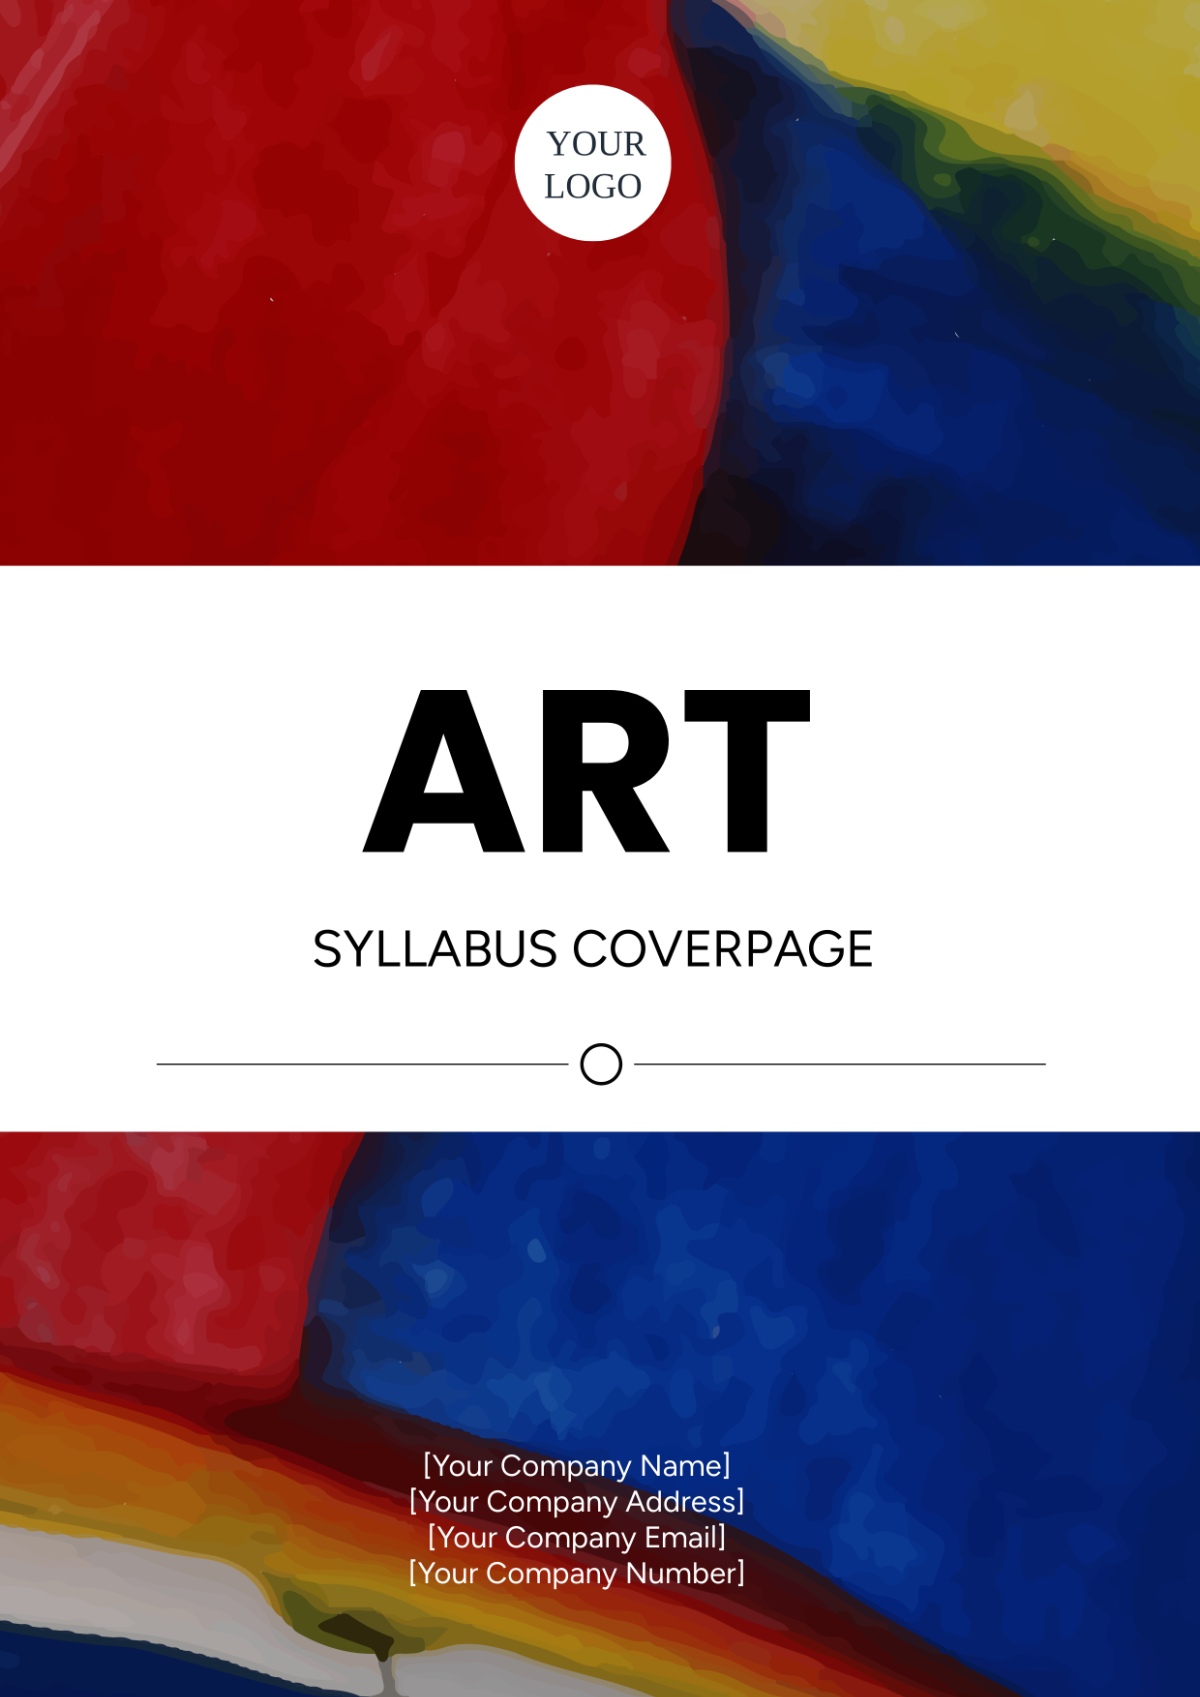 Art Syllabus Cover Page